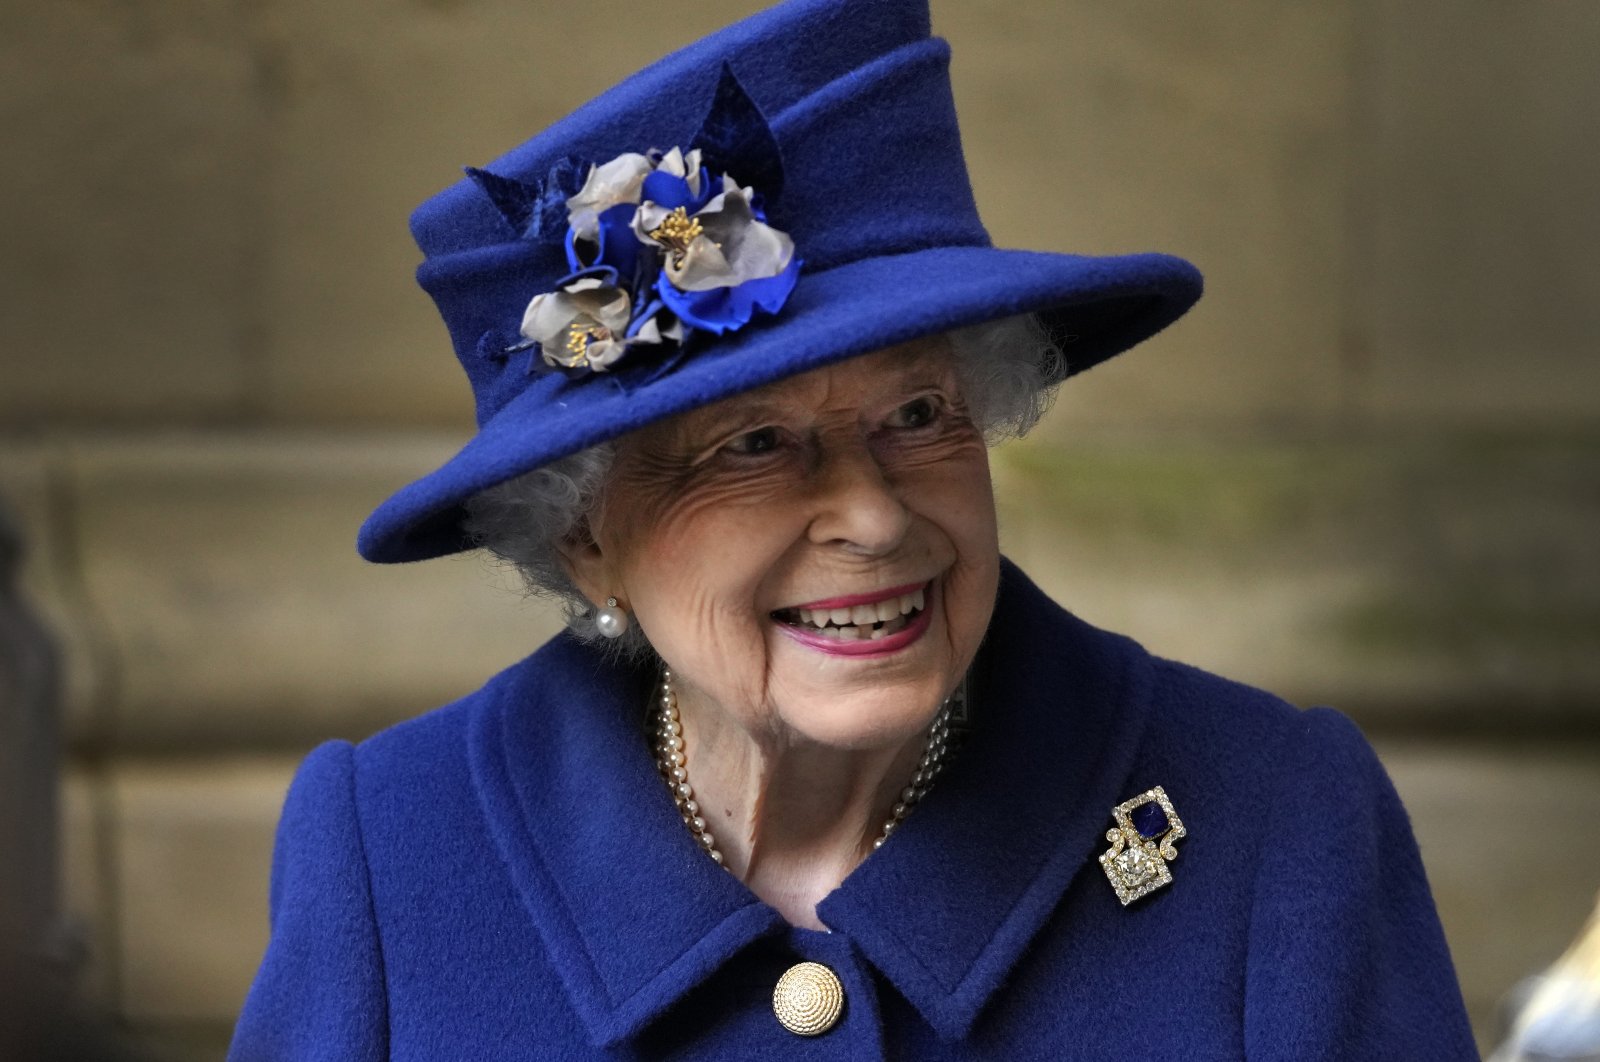 Britain's Queen Elizabeth II leaves after attending a Service of Thanksgiving to mark the Centenary of the Royal British Legion at Westminster Abbey in London, U.K., Oct. 12, 2021.  (AP Photo)